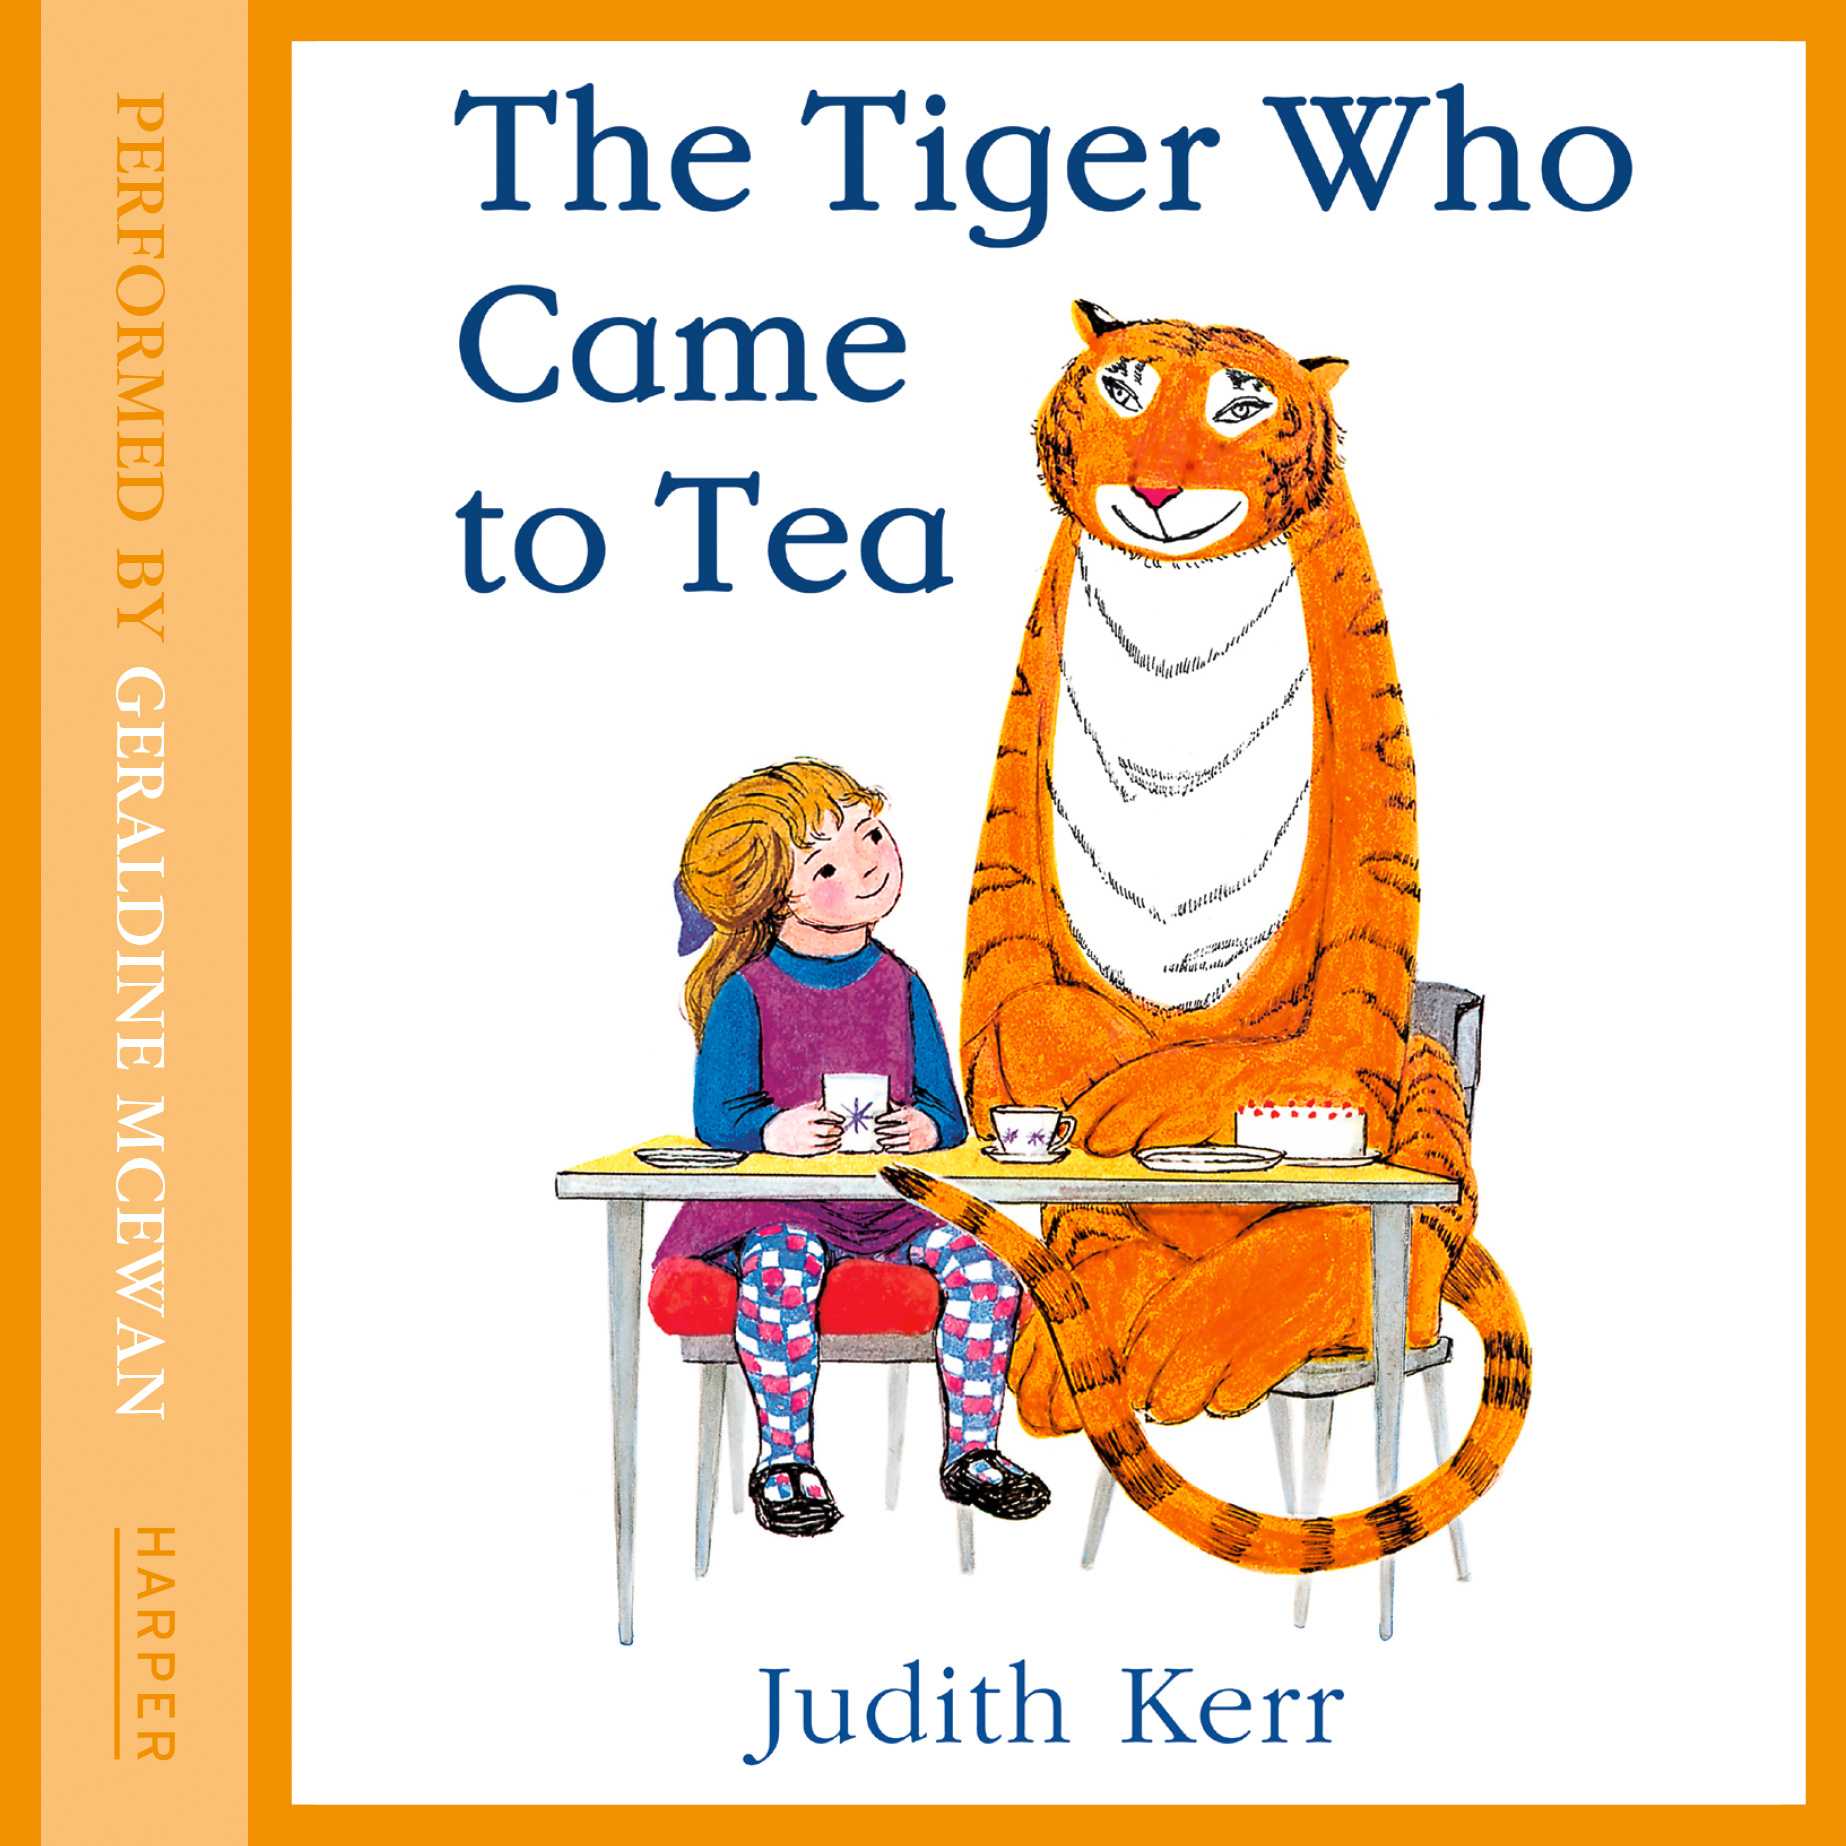 The Tiger Who Came to Tea, by Judith Kerr